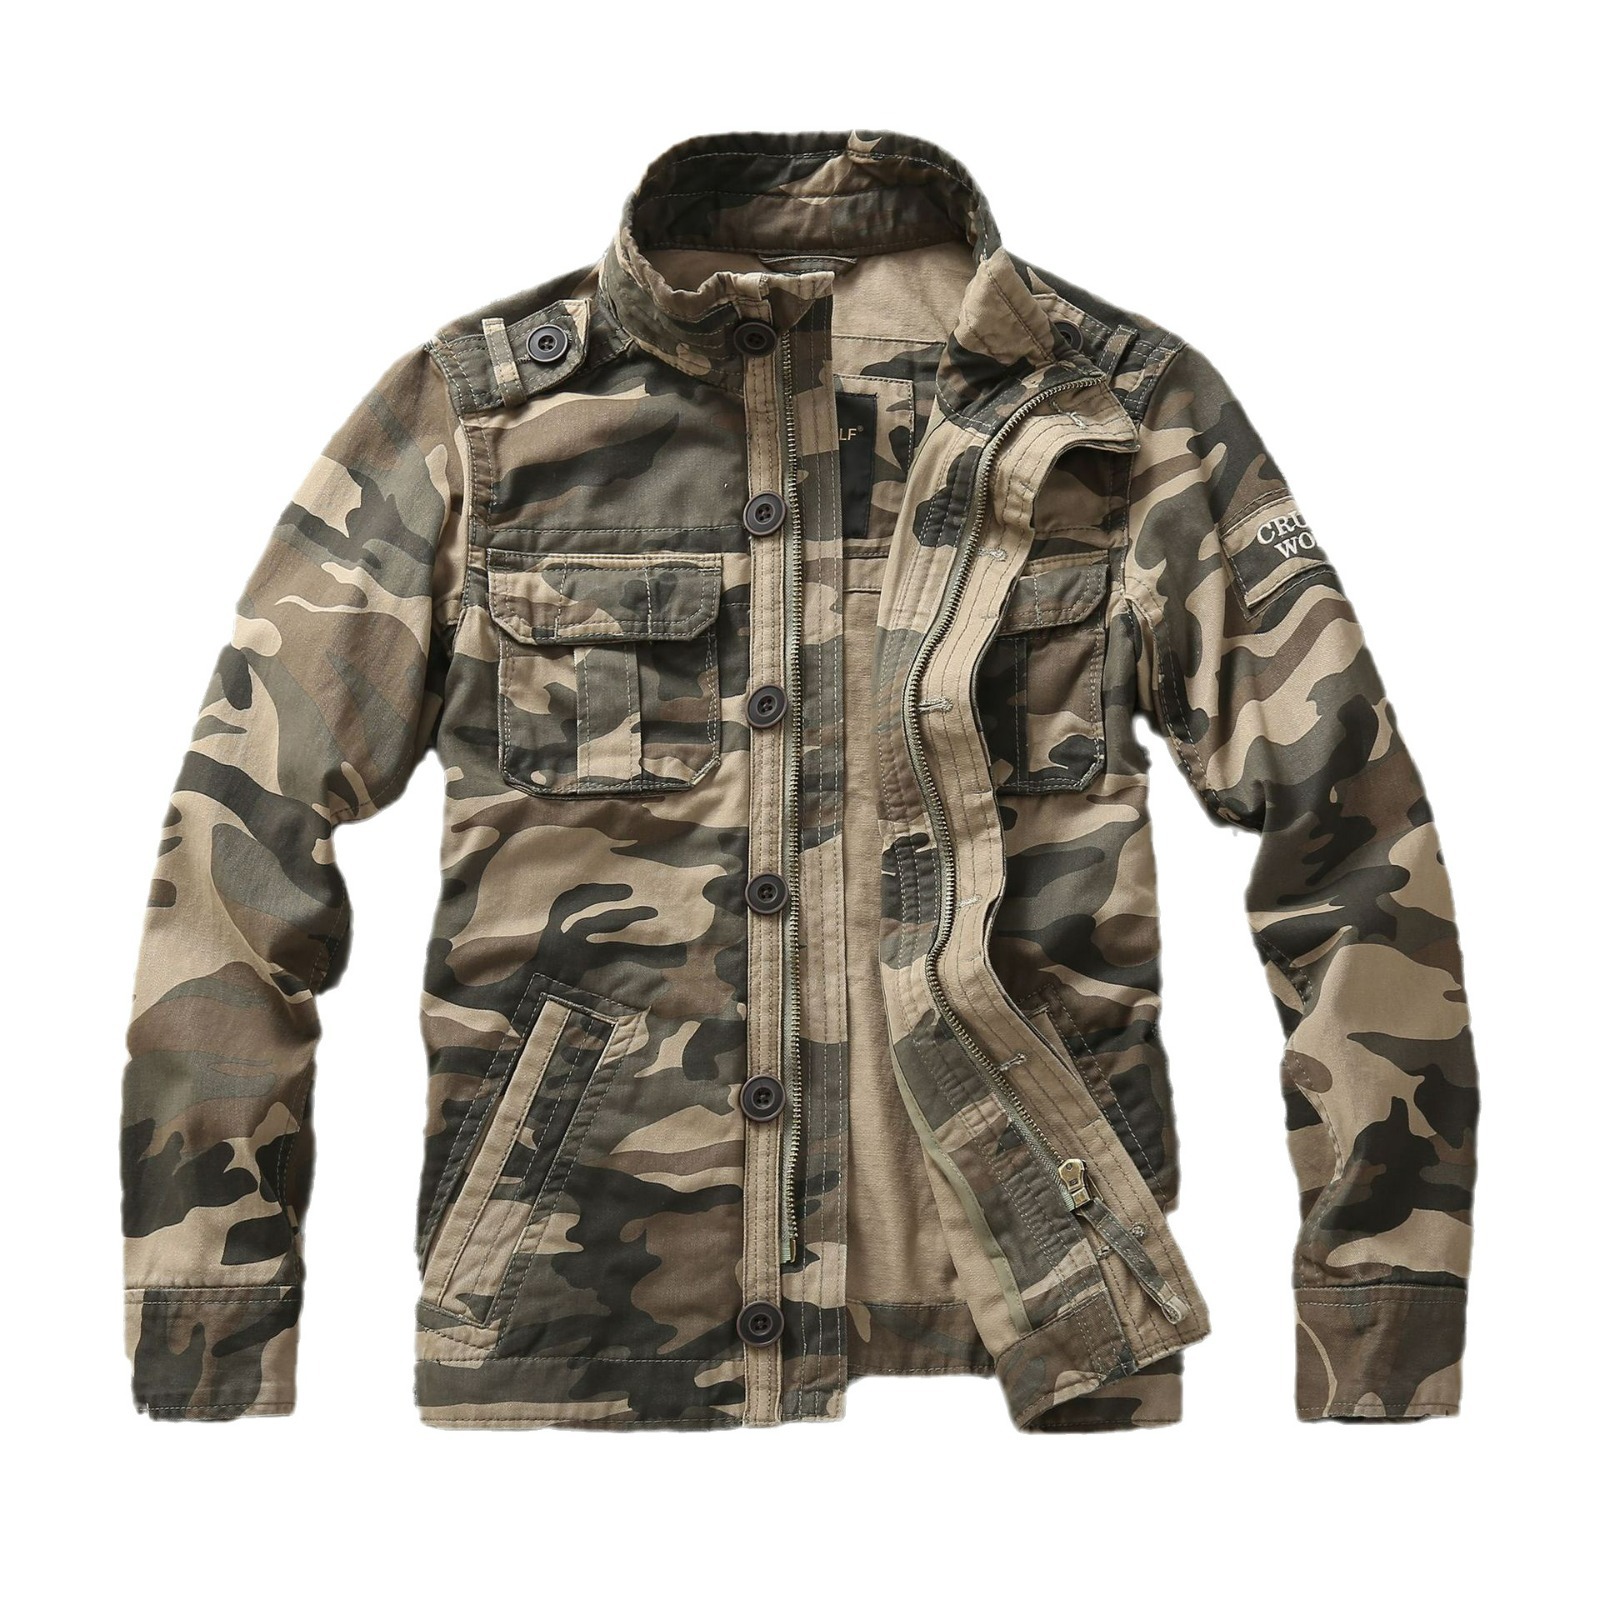 Men's Autumn and Winter New Pure Cotton Casual Camouflage Workwear Jacket Non-Hooded Jacket Military Uniform Middle-Aged Men's Jacket